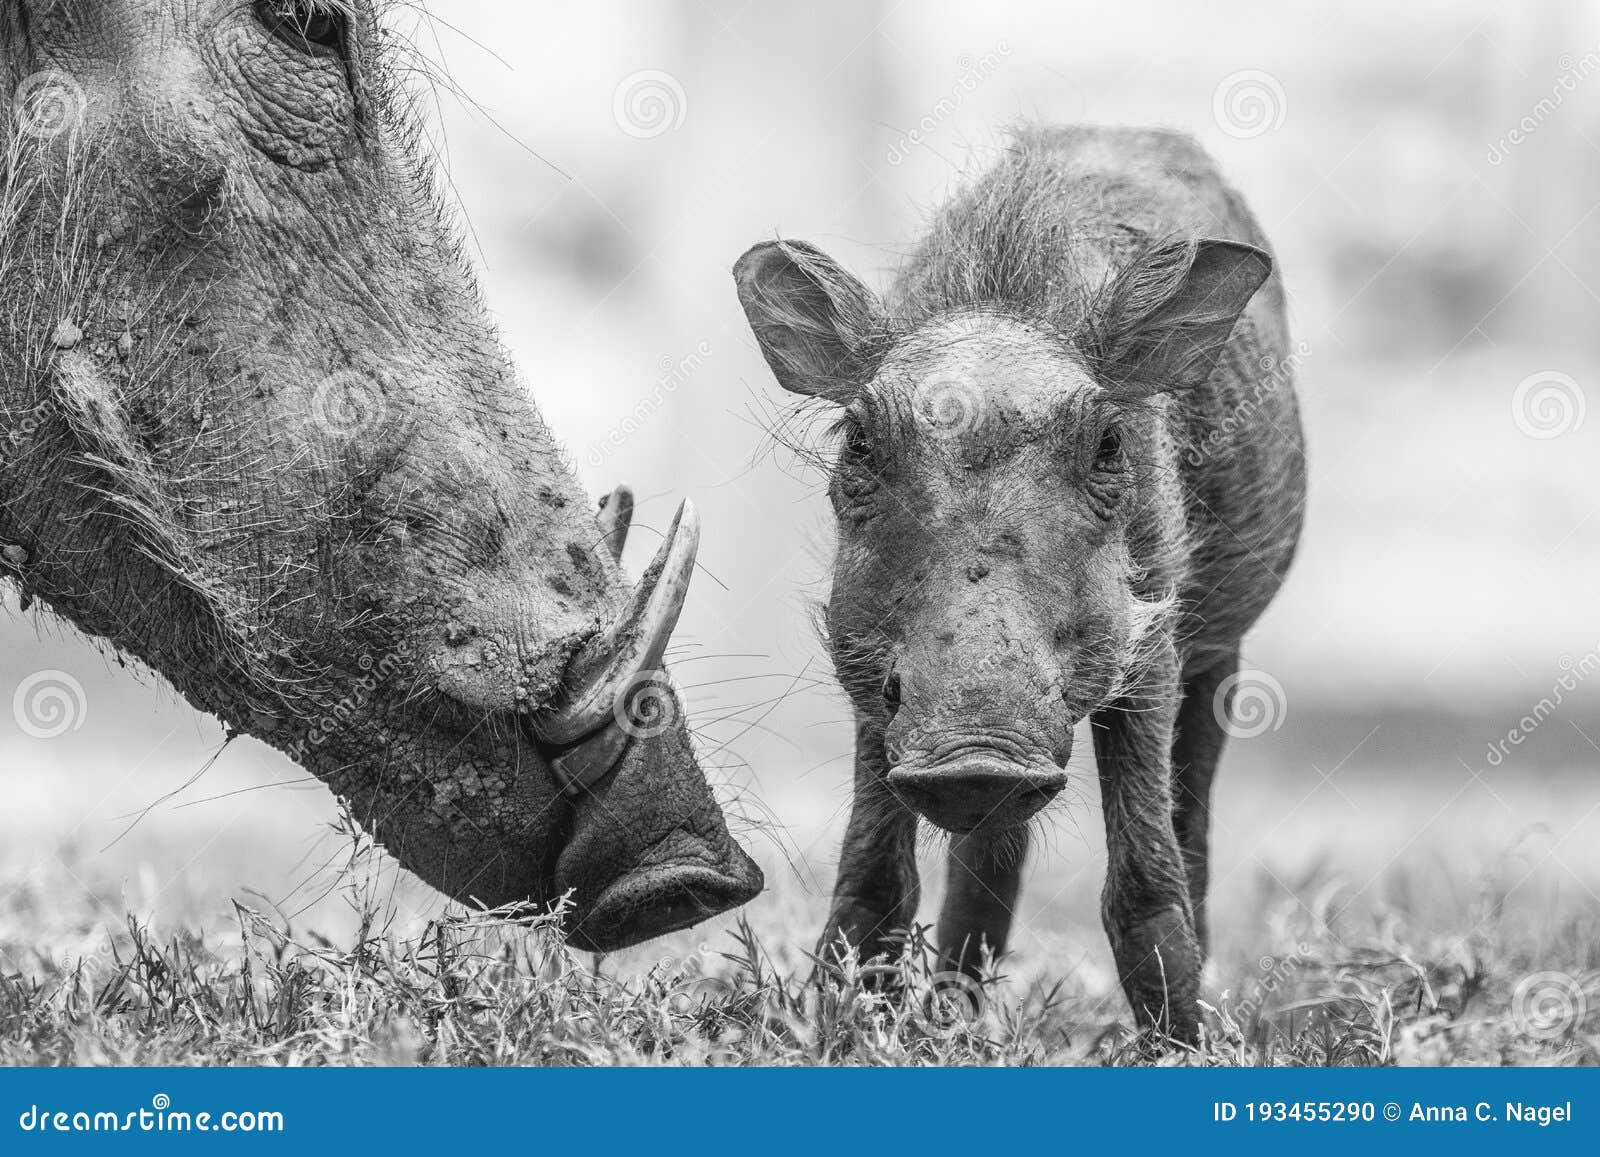 A Baby Warthog Standing Next To Its Mother Stock Photo Image Of Lion Africa